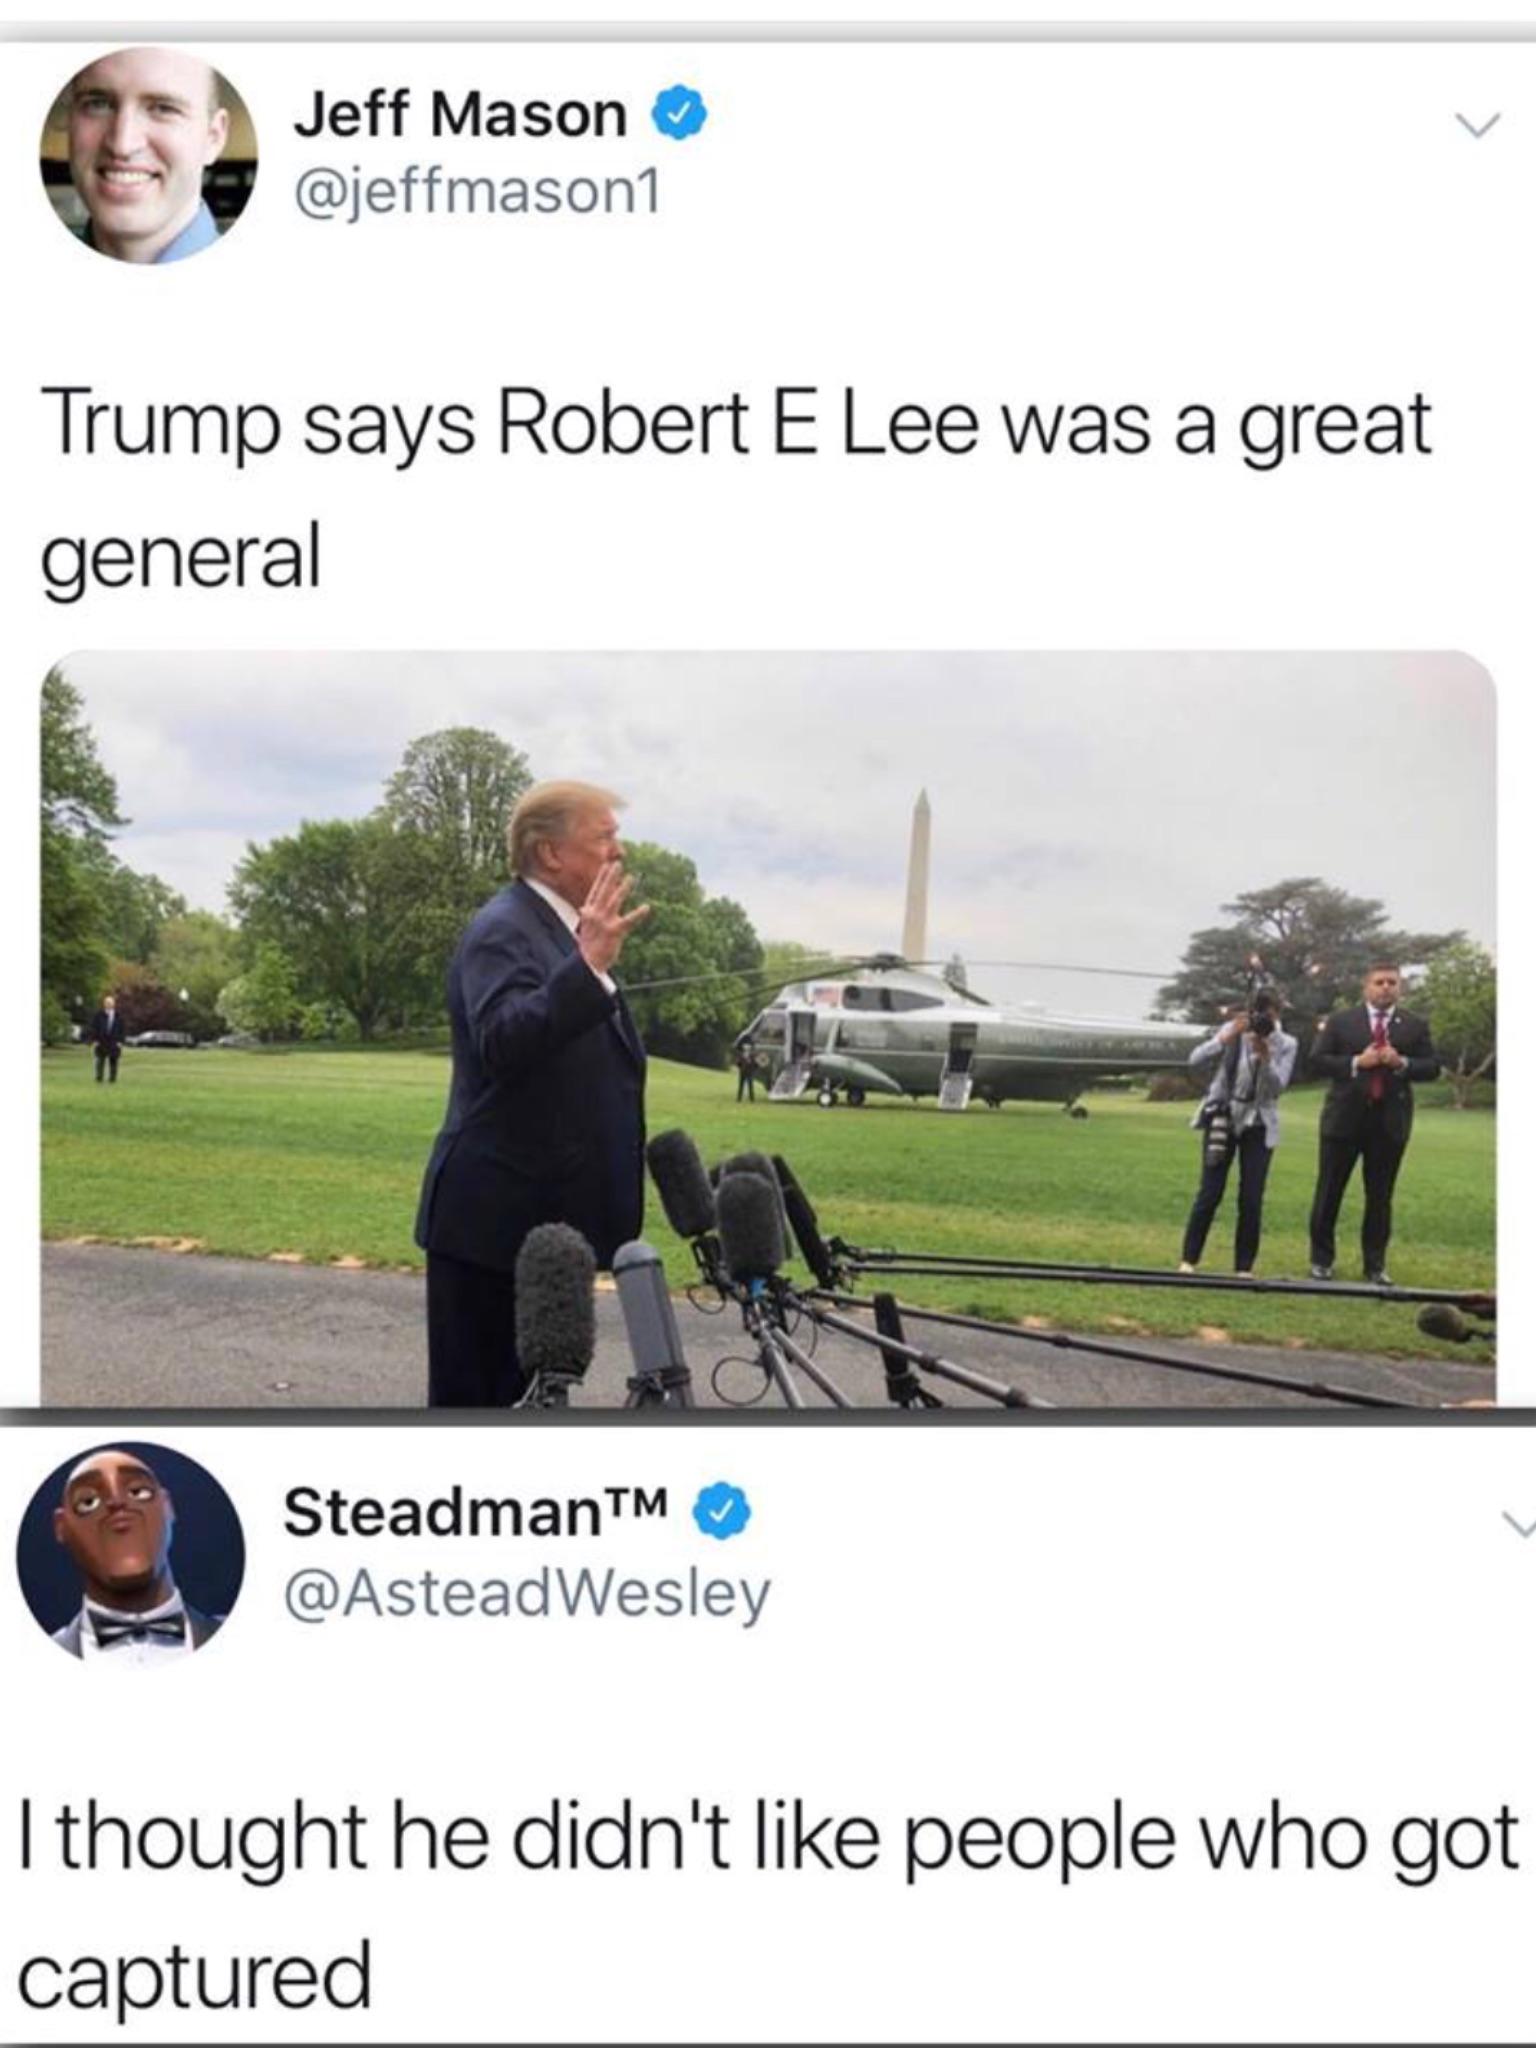 grass - Jeff Mason Trump says Robert E Lee was a great general SteadmanTM I thought he didn't people who got captured